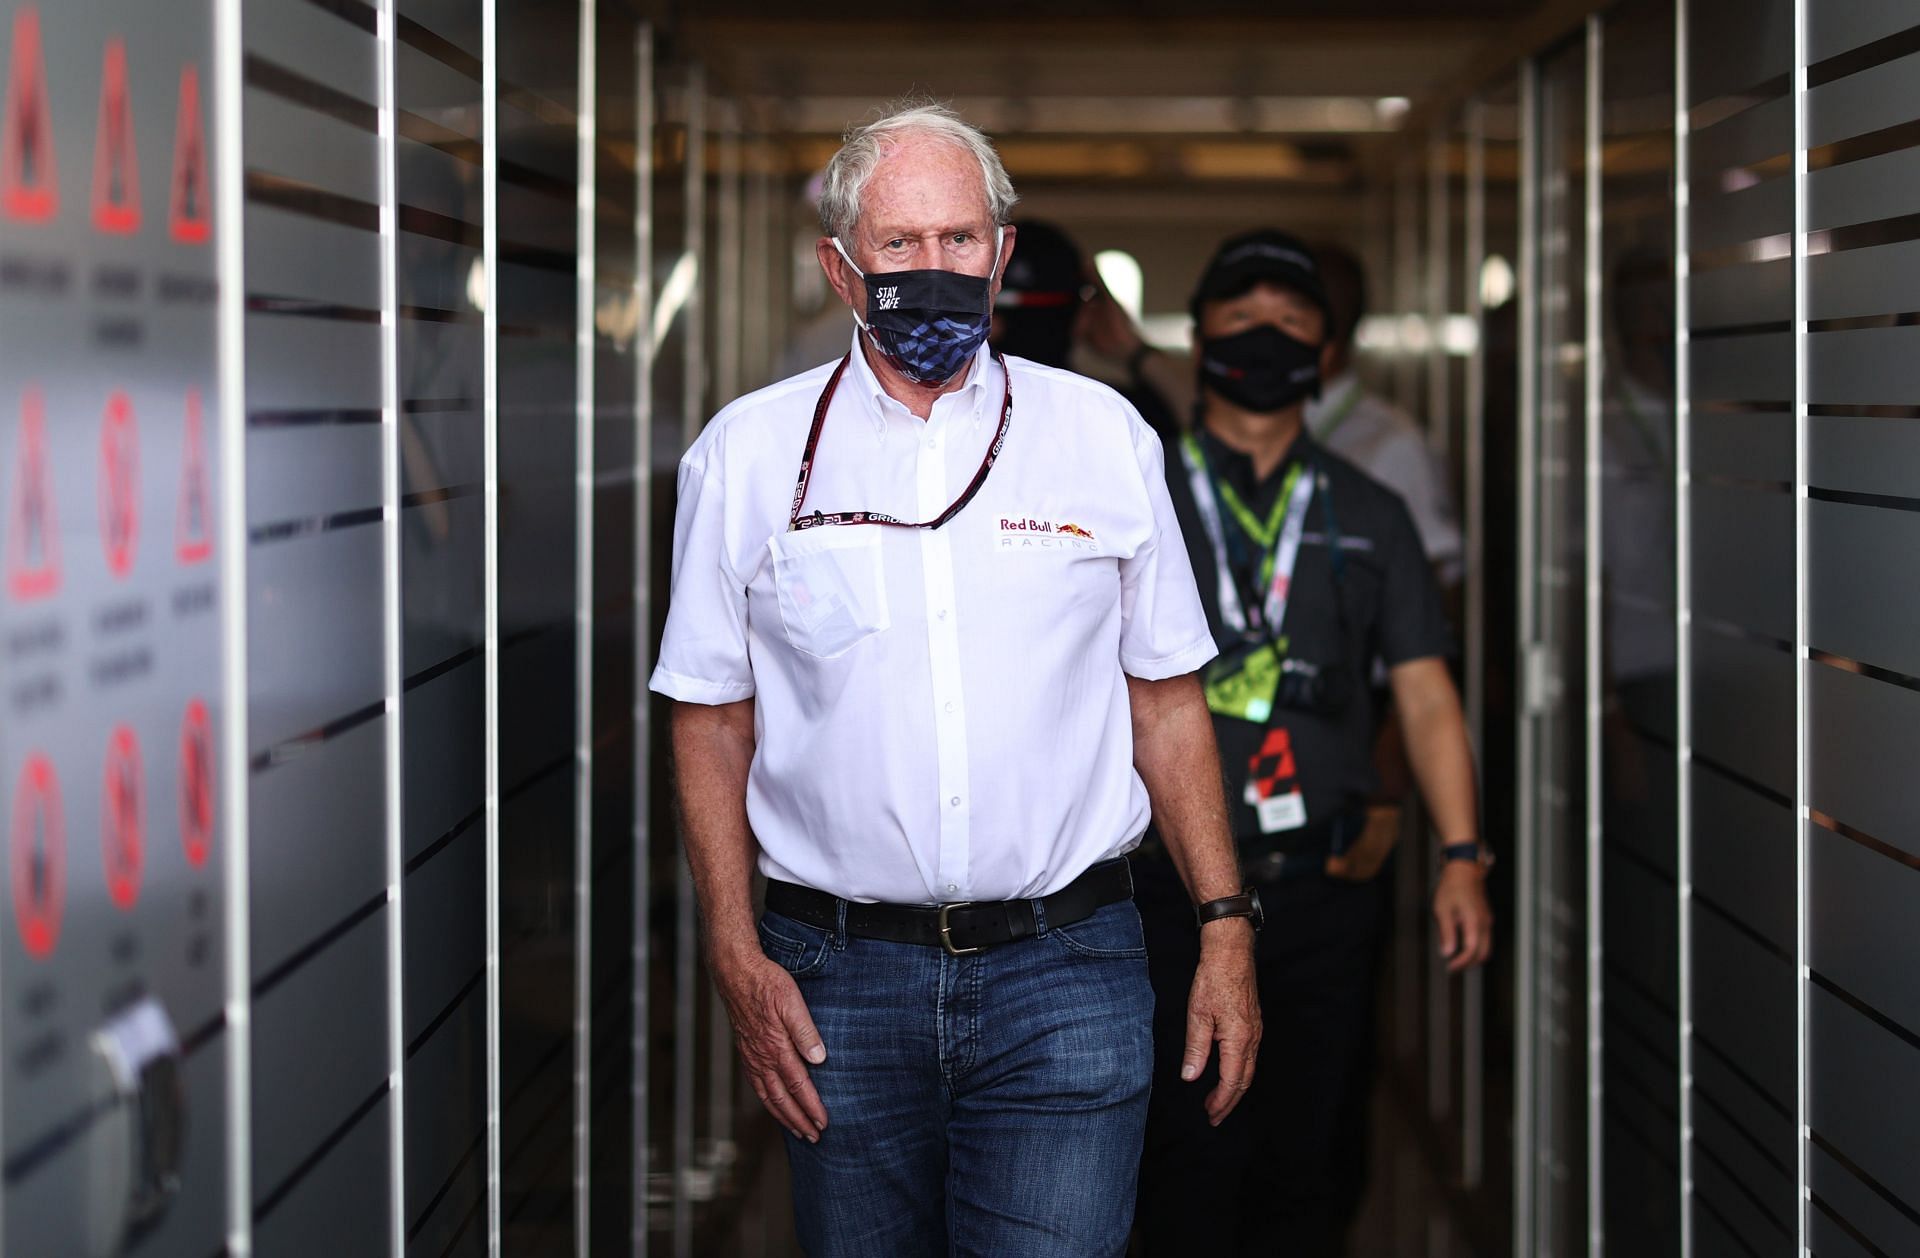 F1 Grand Prix of USA - Helmut Marko arrives at the Circuit of The Americas